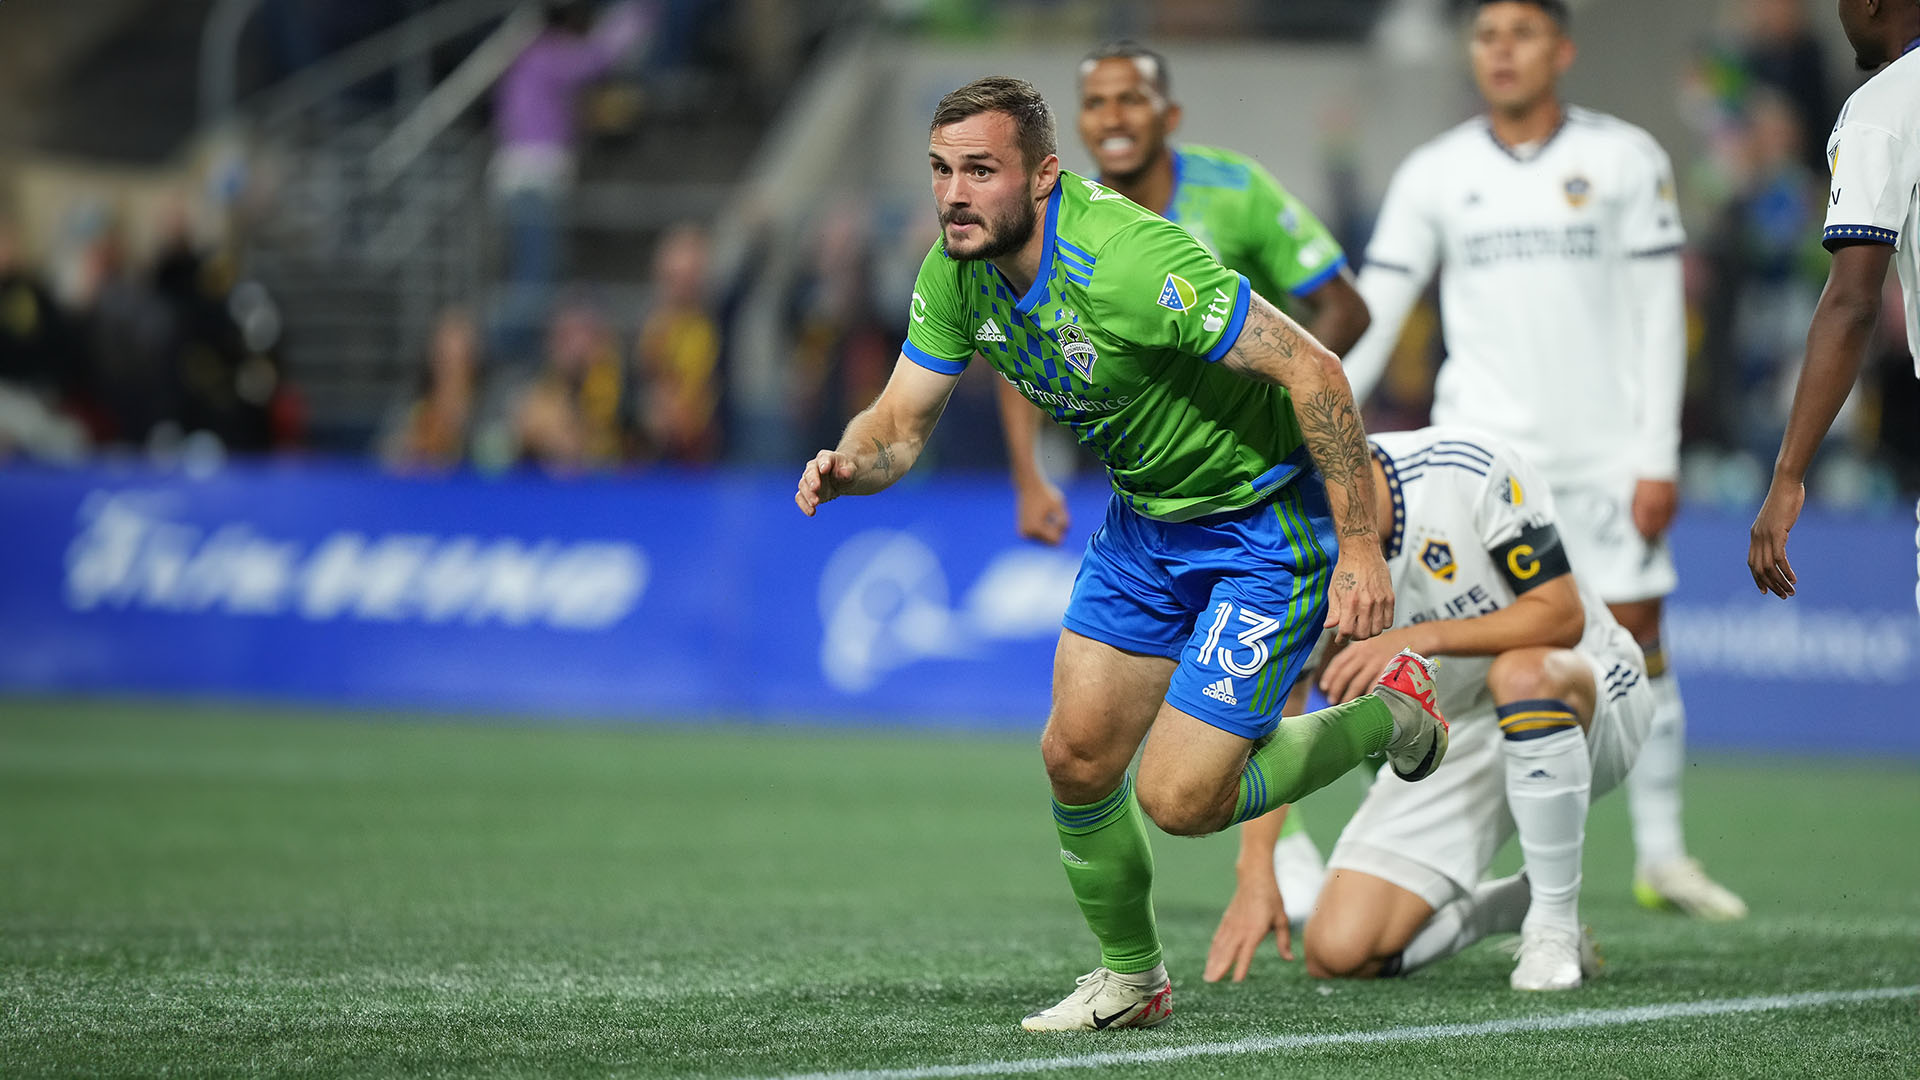 He returned from the loan in 2021 and once again became a key player for Seattle. This year, he has been the team's top scorer in the regular season with 11 goals, just as he was top scorer in 2016.